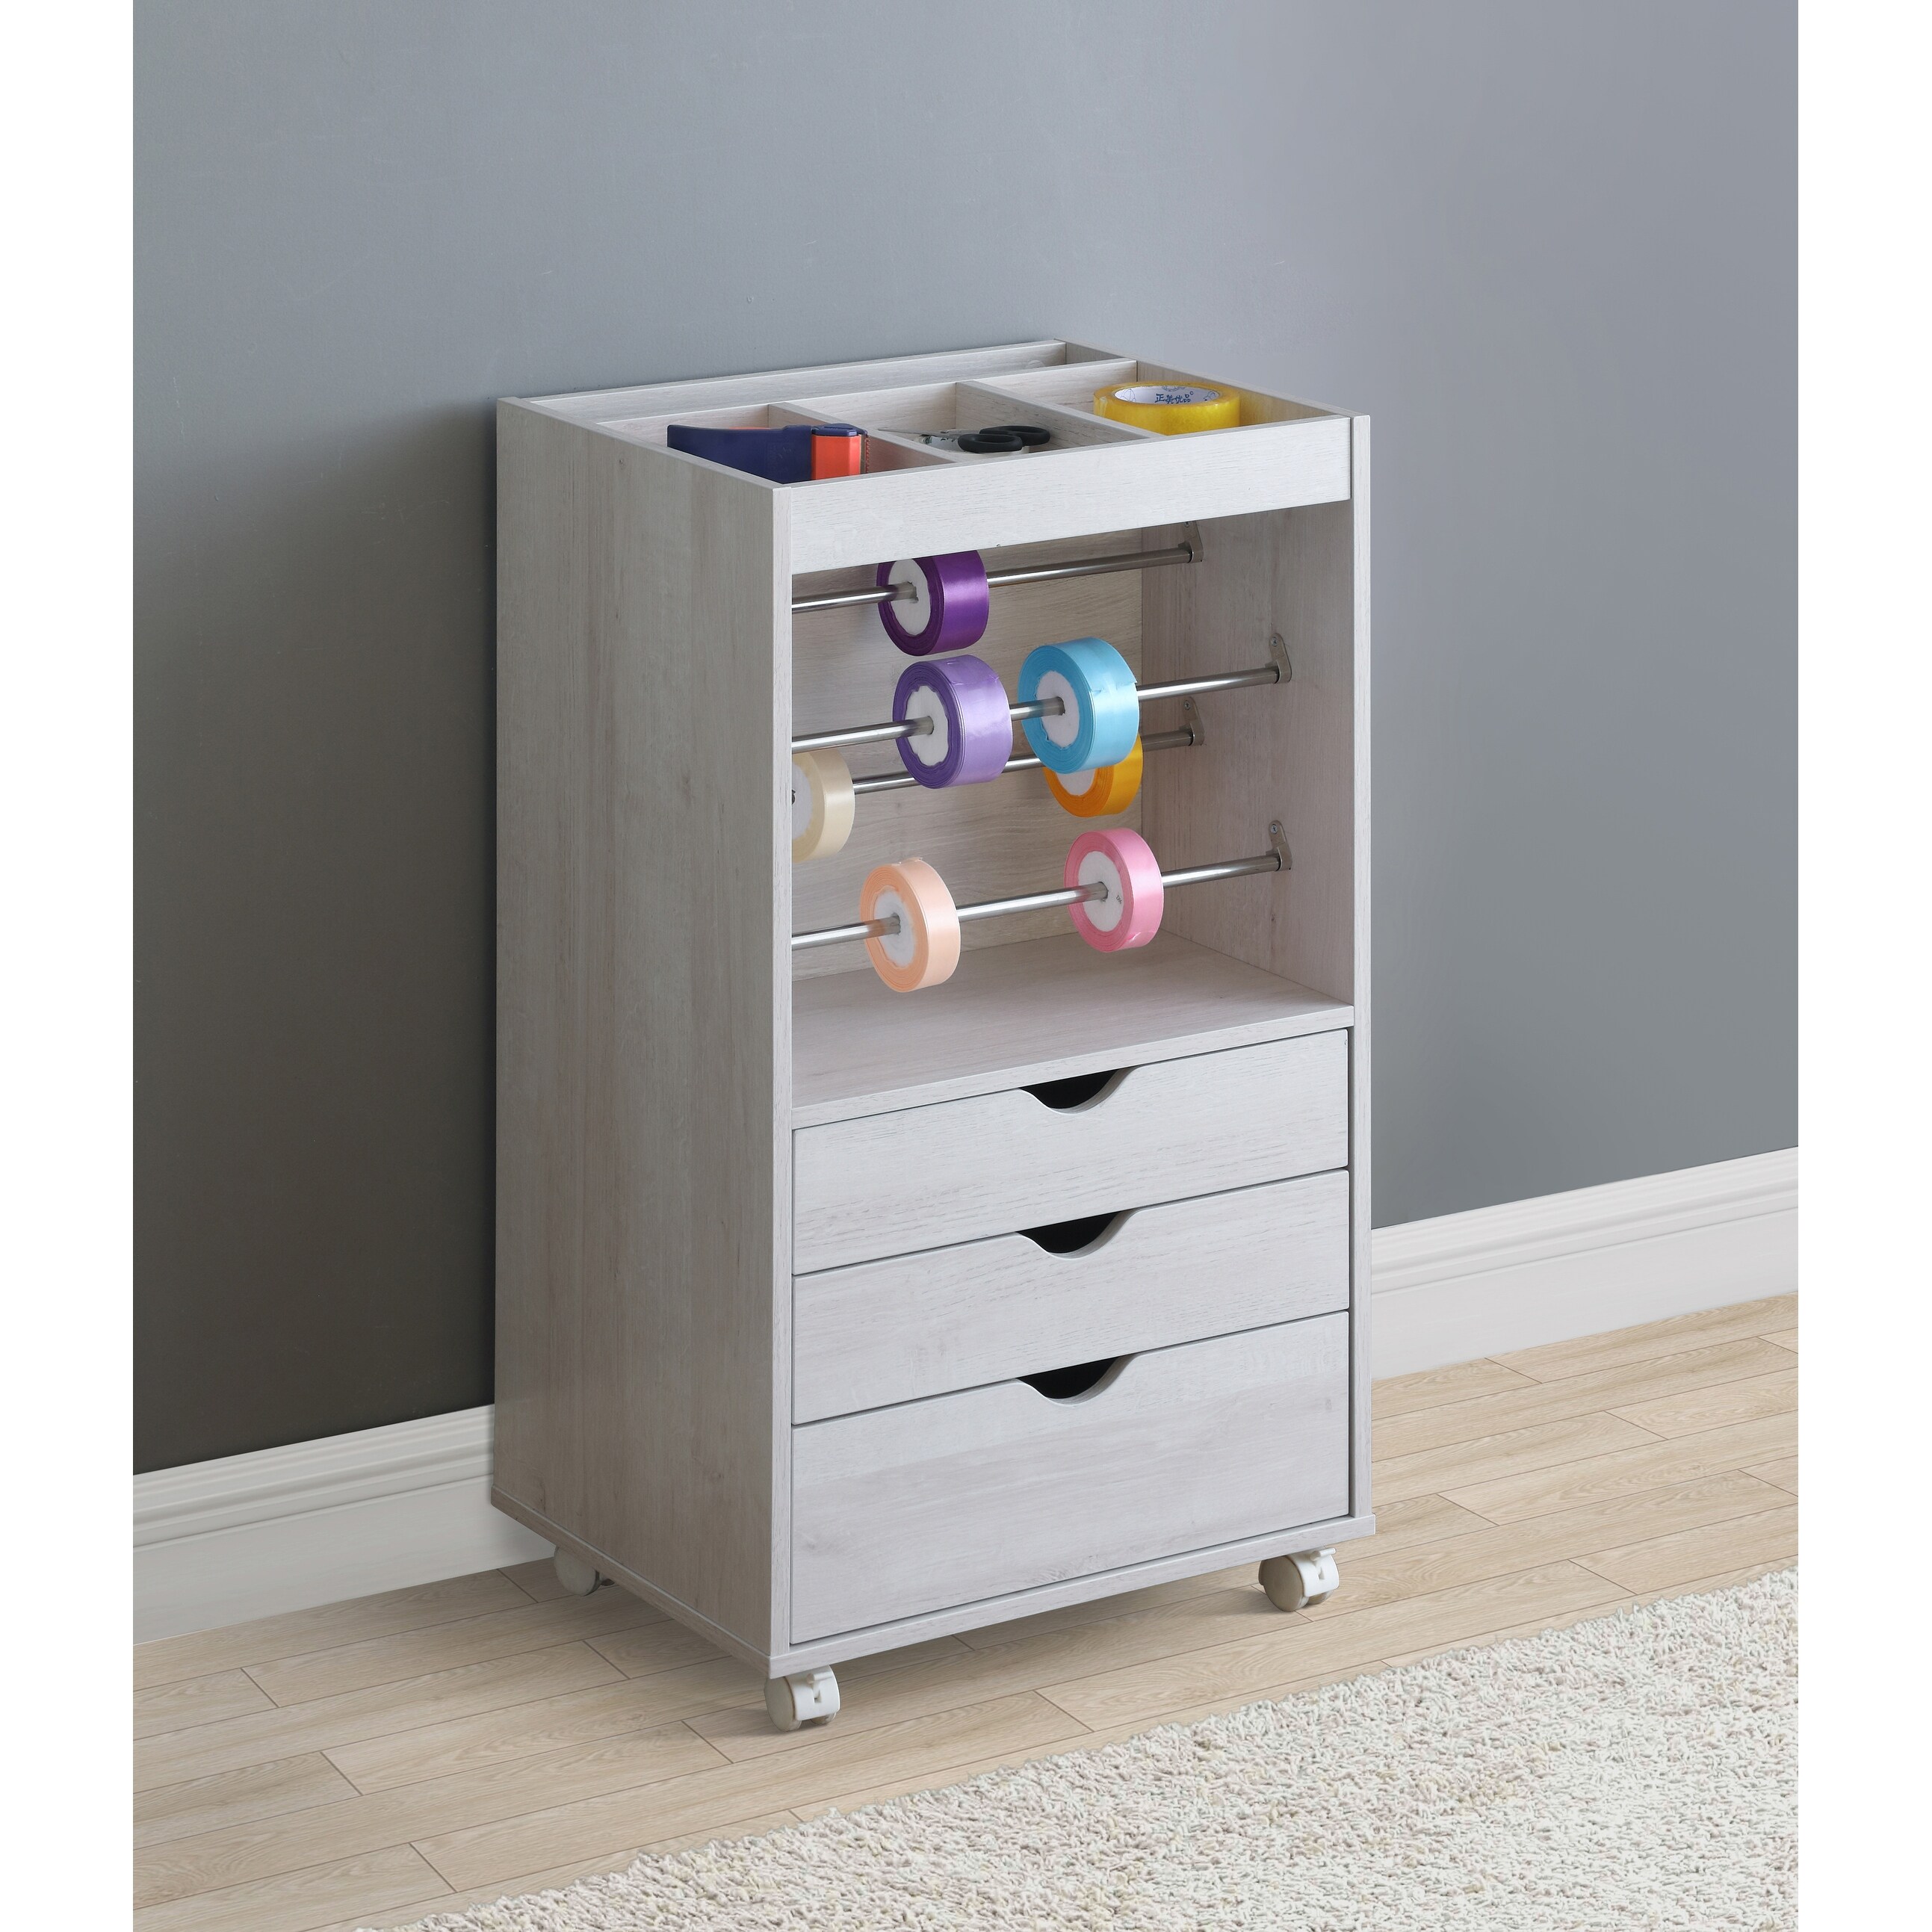 https://ak1.ostkcdn.com/images/products/is/images/direct/e4b9d853af73e42596cfd2a3e88b048438680d73/Garrett-White-Oak-3-drawer-Storage-Cabinet-with-Wheels.jpg